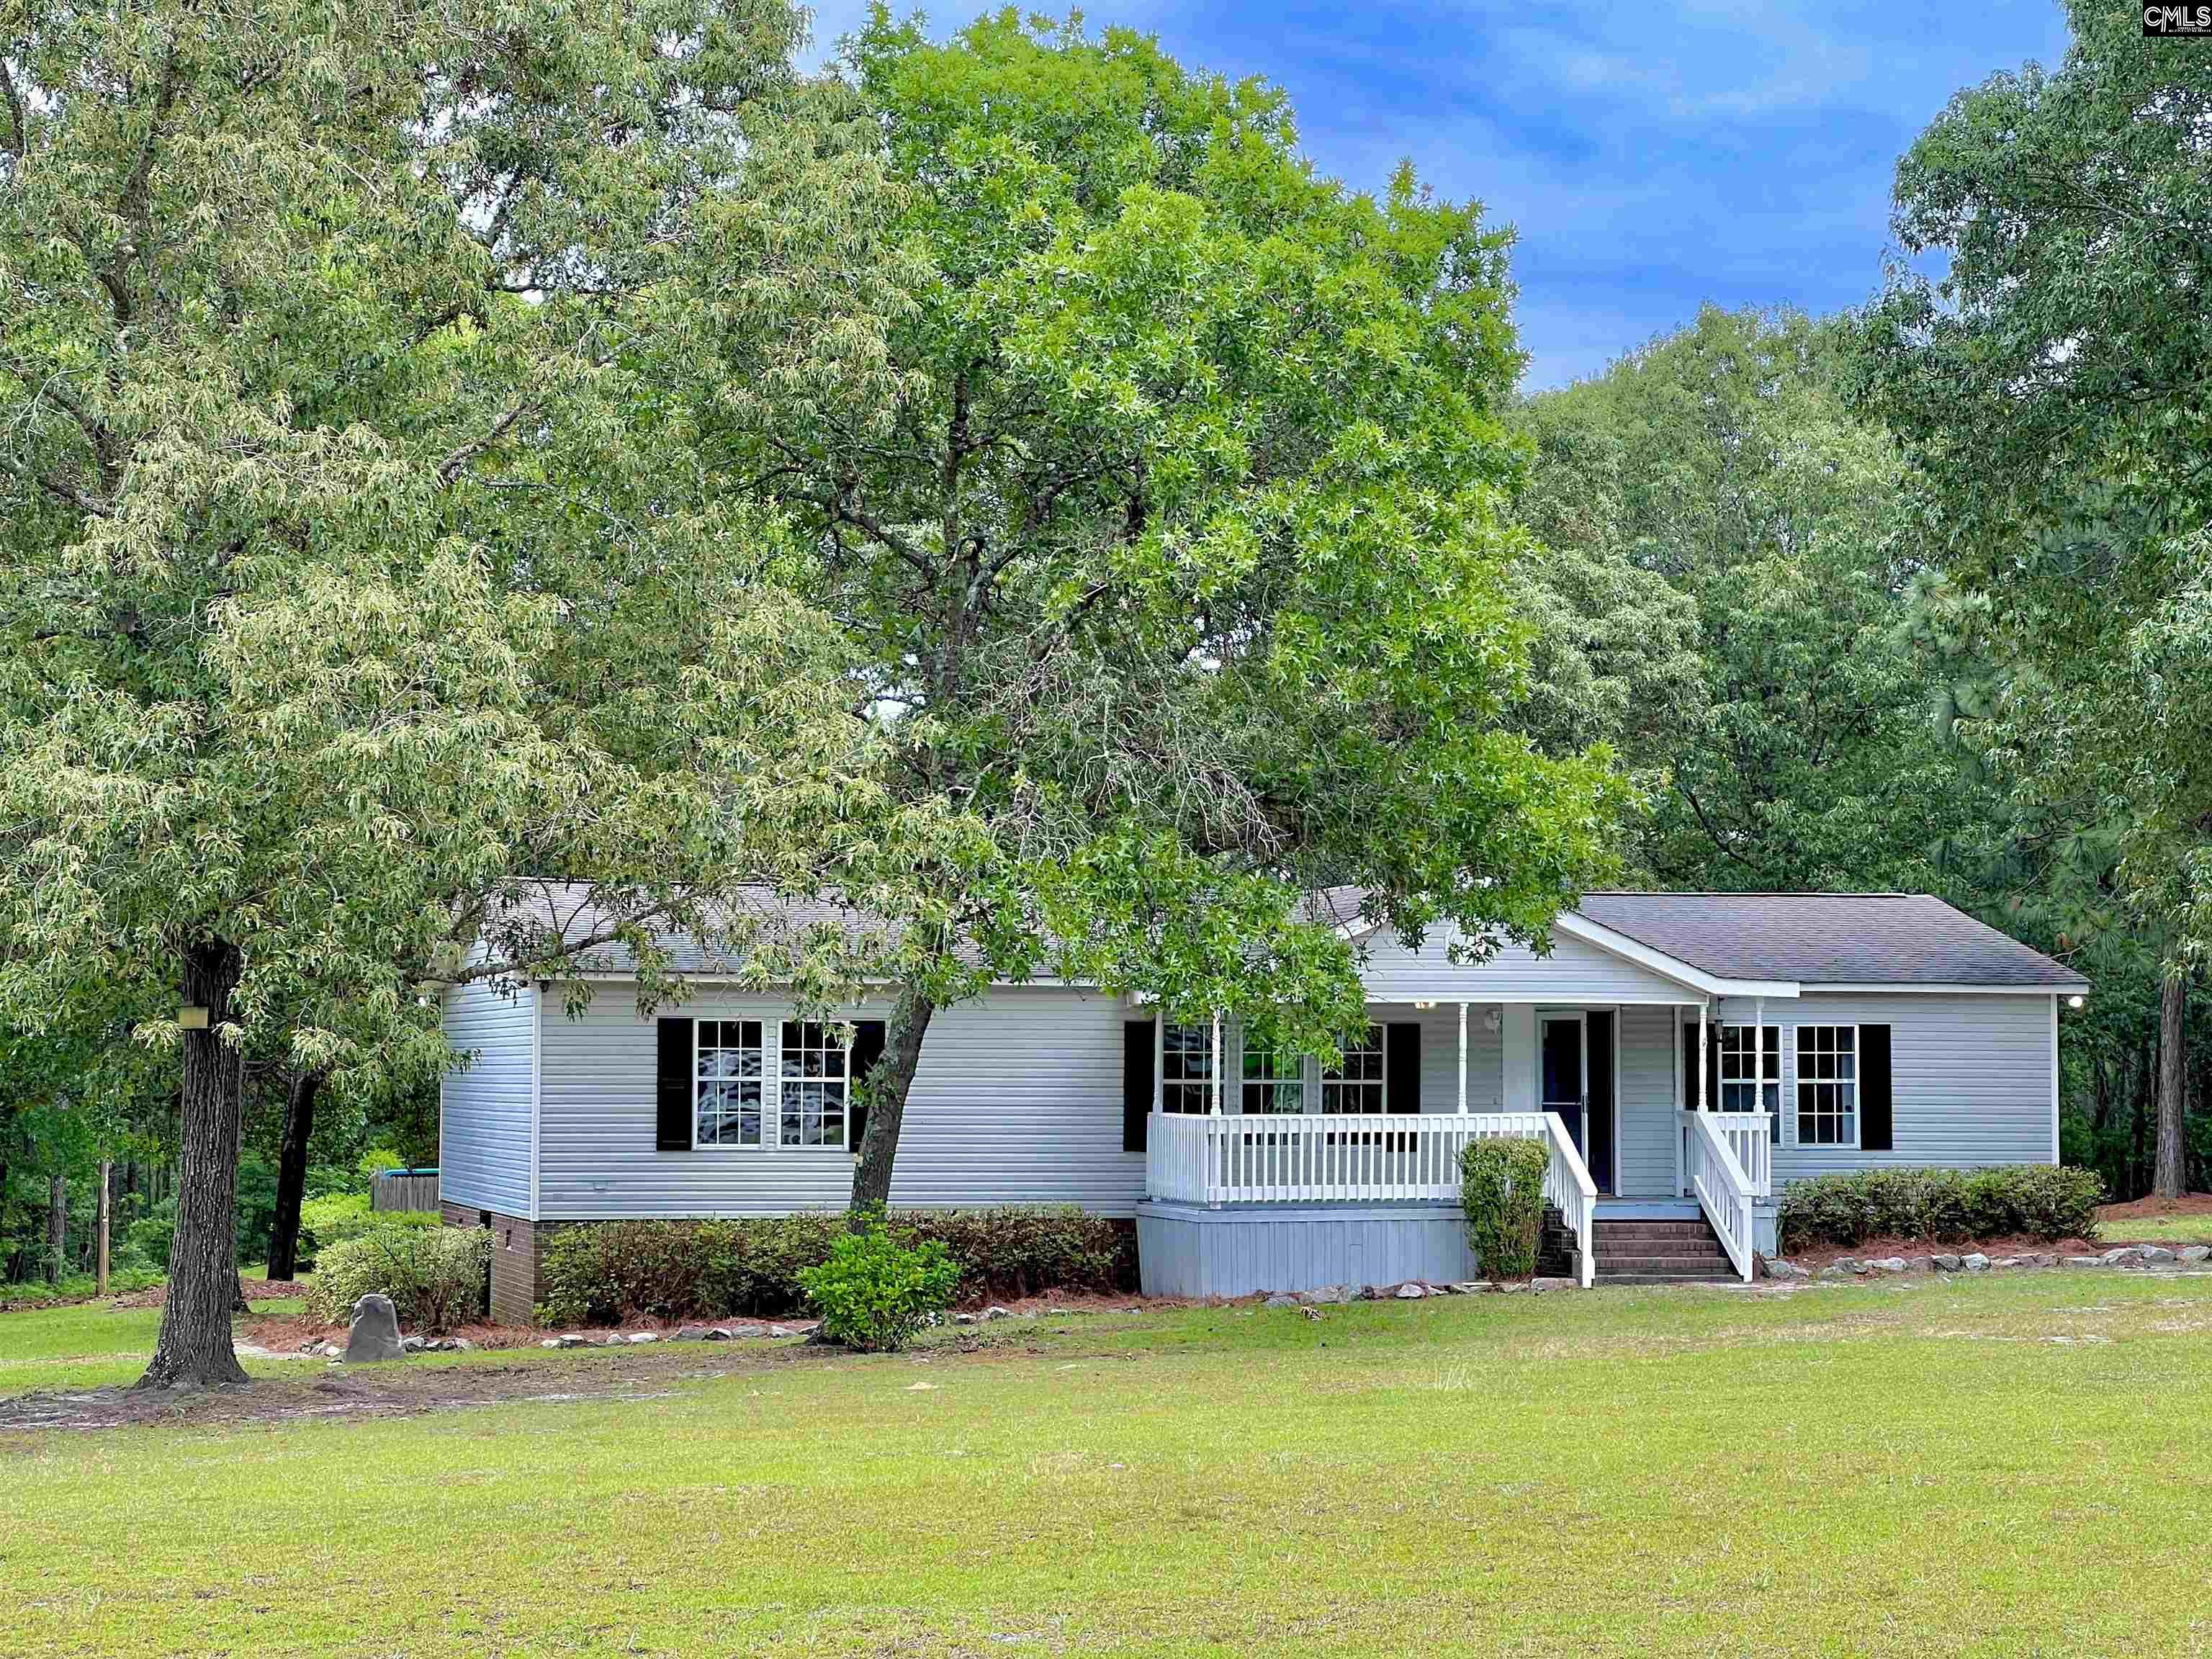 143 Eastover Road, Eastover, SC 29044 Listing Photo 1